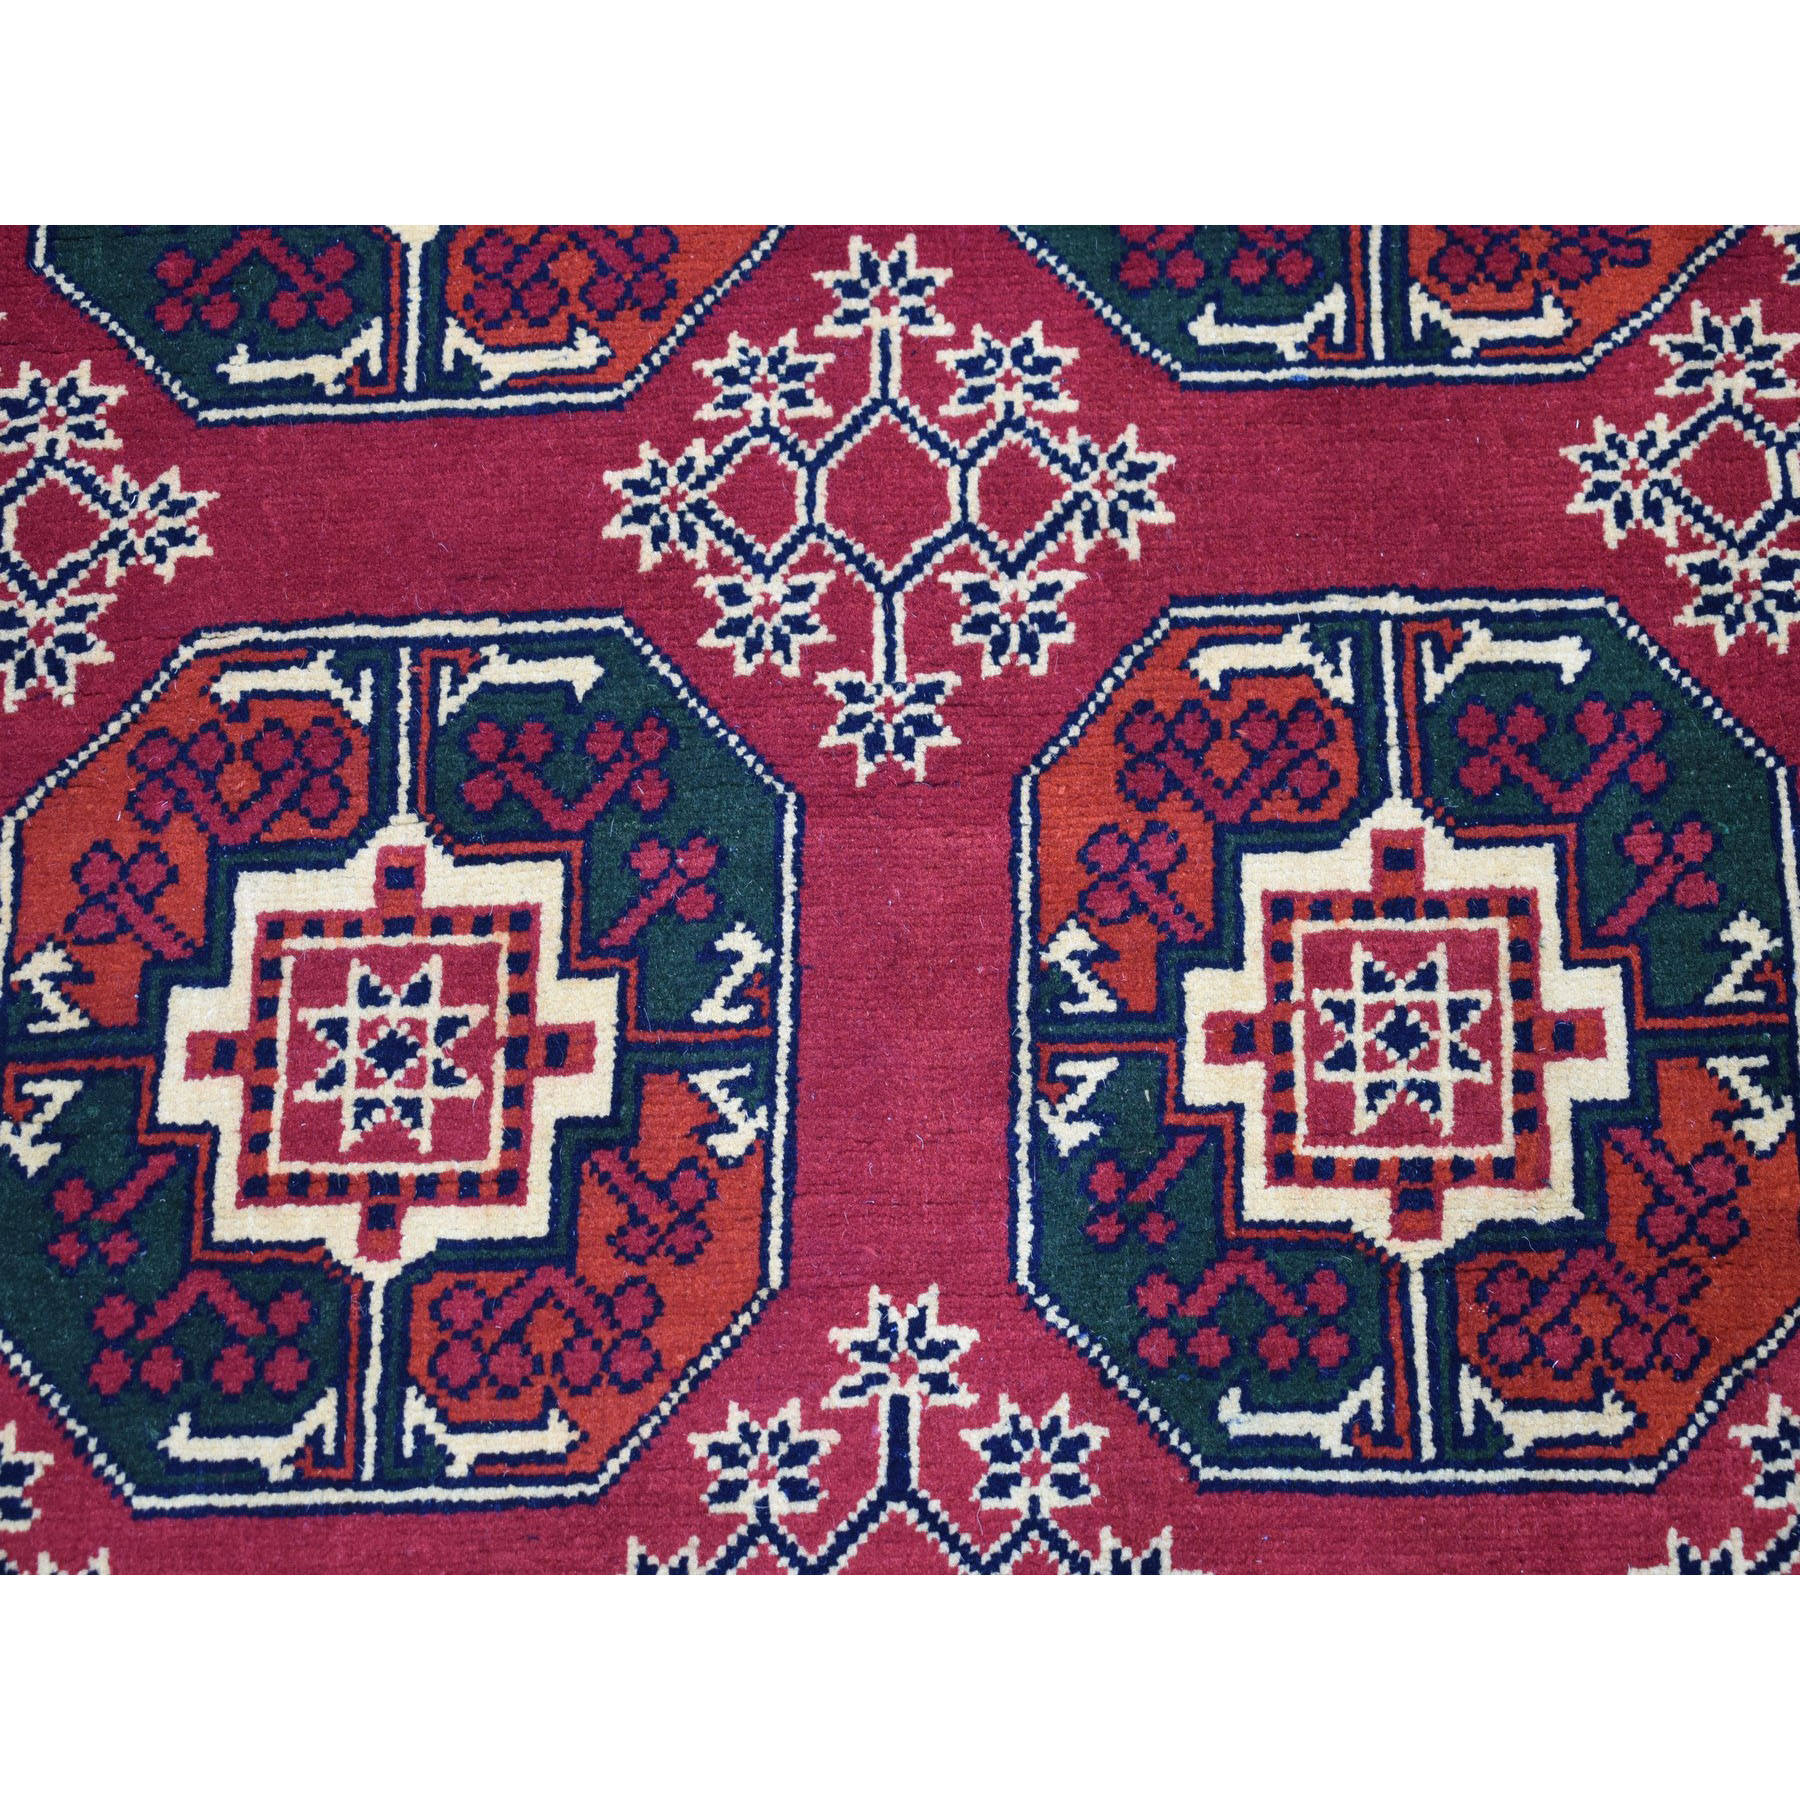 3'3"x5'3" Vintage Red Elephant Feet Design Afghan Andkhoy Pure Wool Hand Woven Oriental Rug 